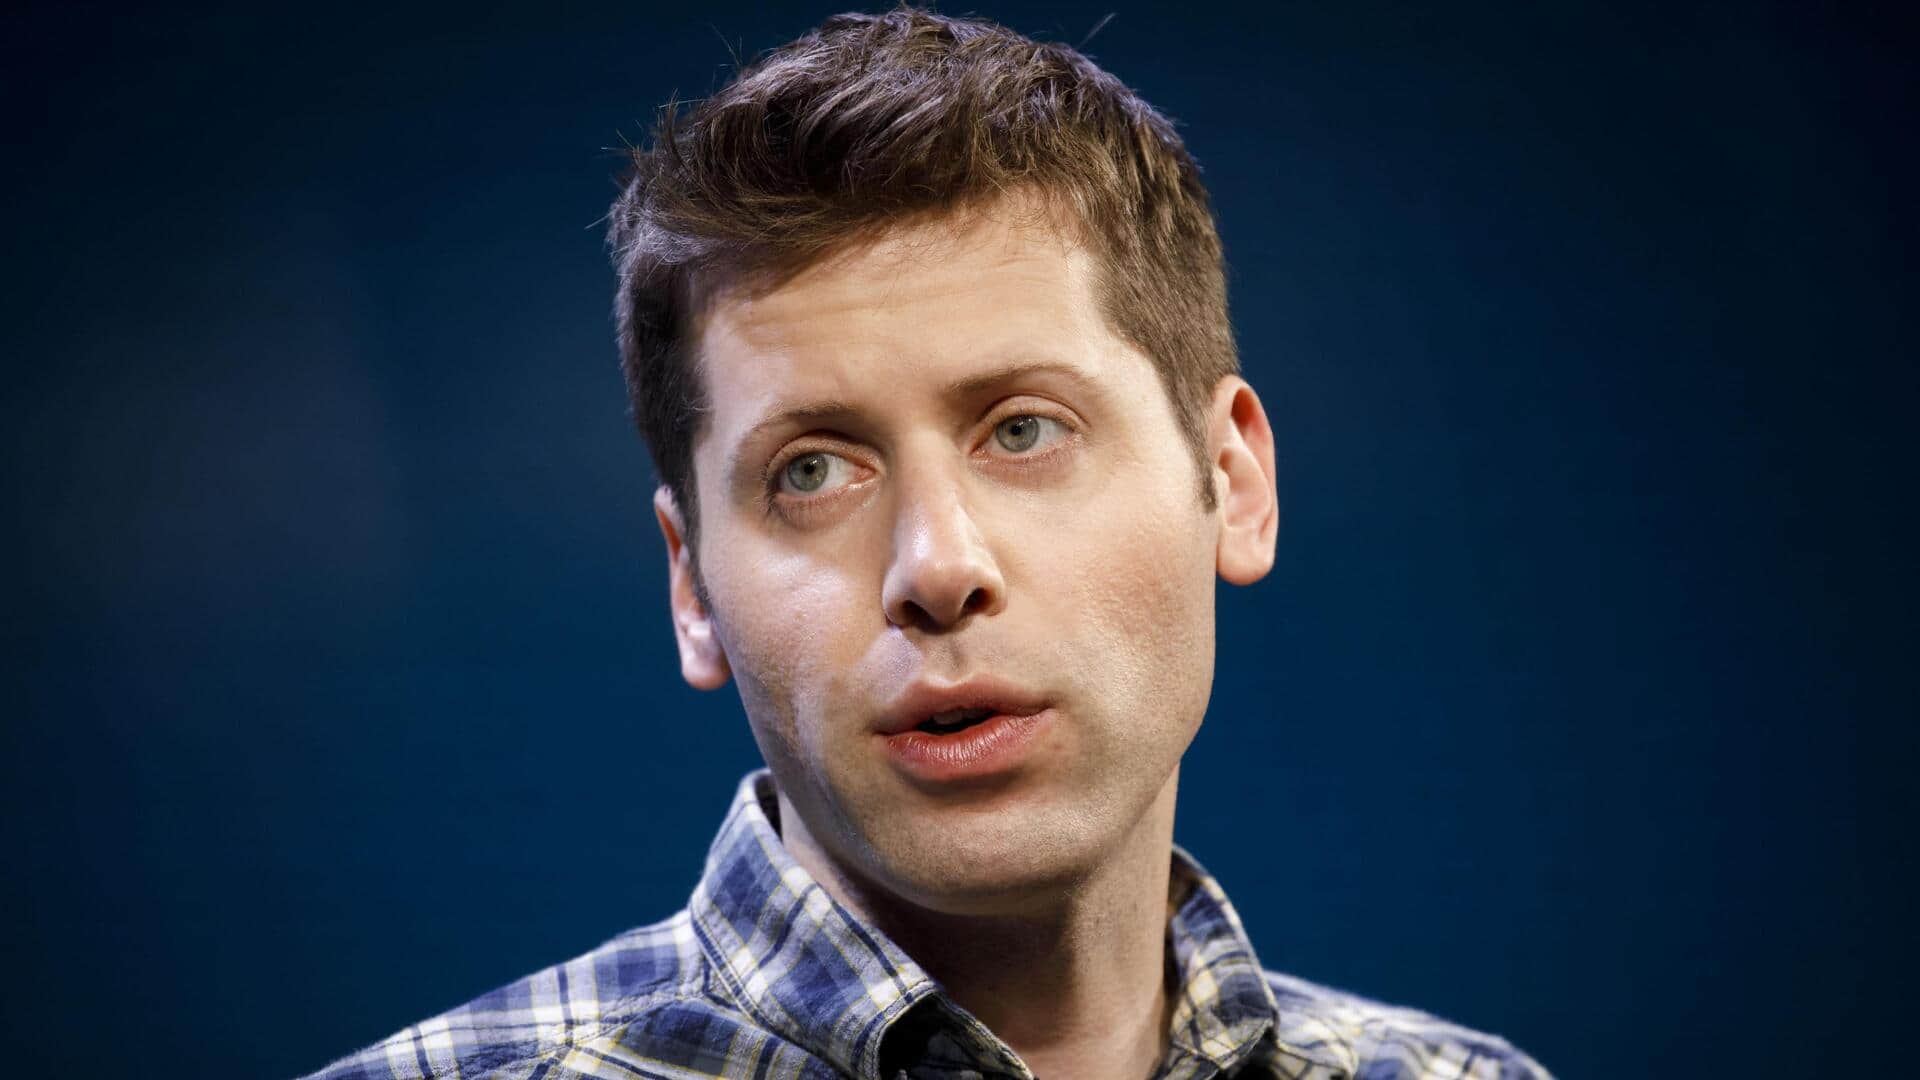 OpenAI CEO Sam Altman expresses discomfort with newfound fame